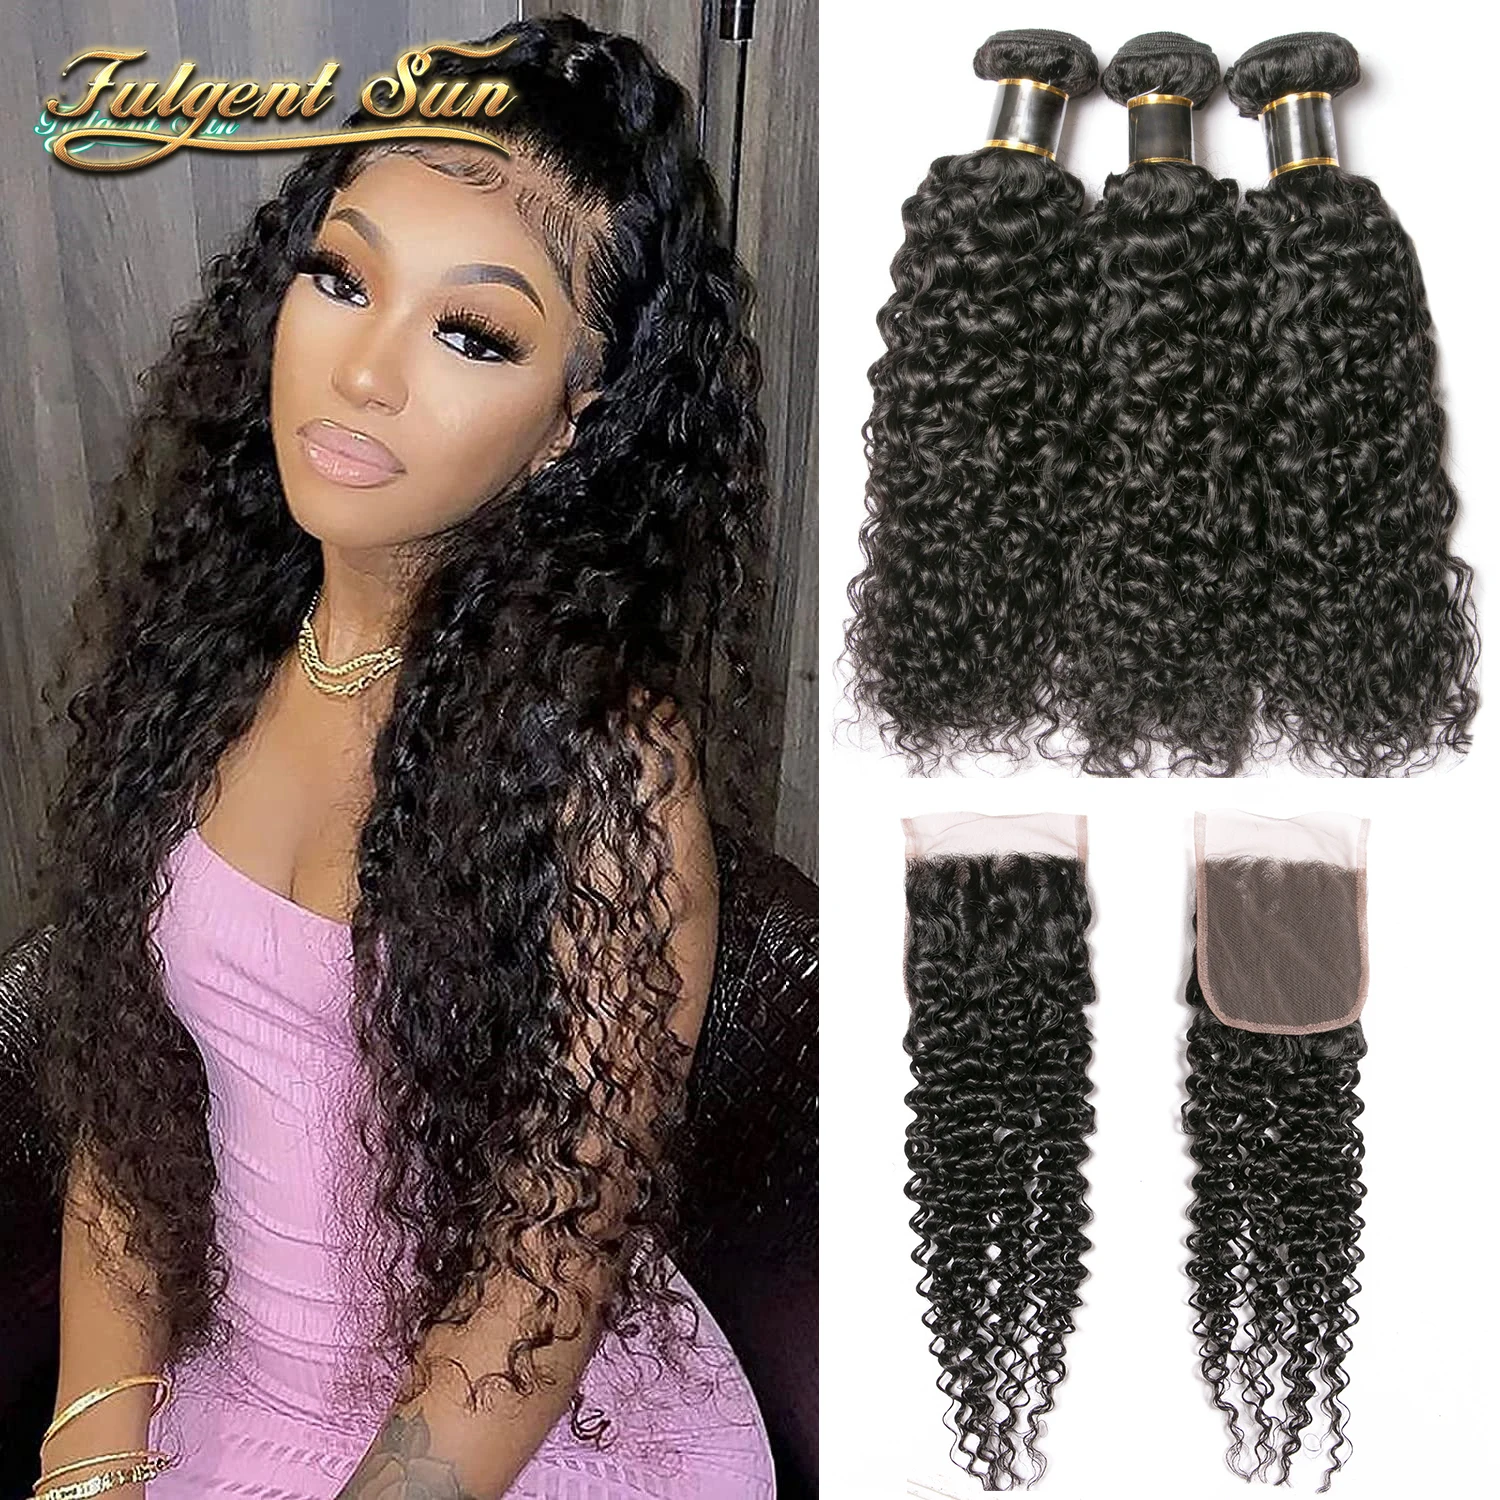 Kinky Curly Bundles With Closure 4x4 Hd Lace Closure Real Human Hair Bundles With Closure Curly Brazilian Weave For Women